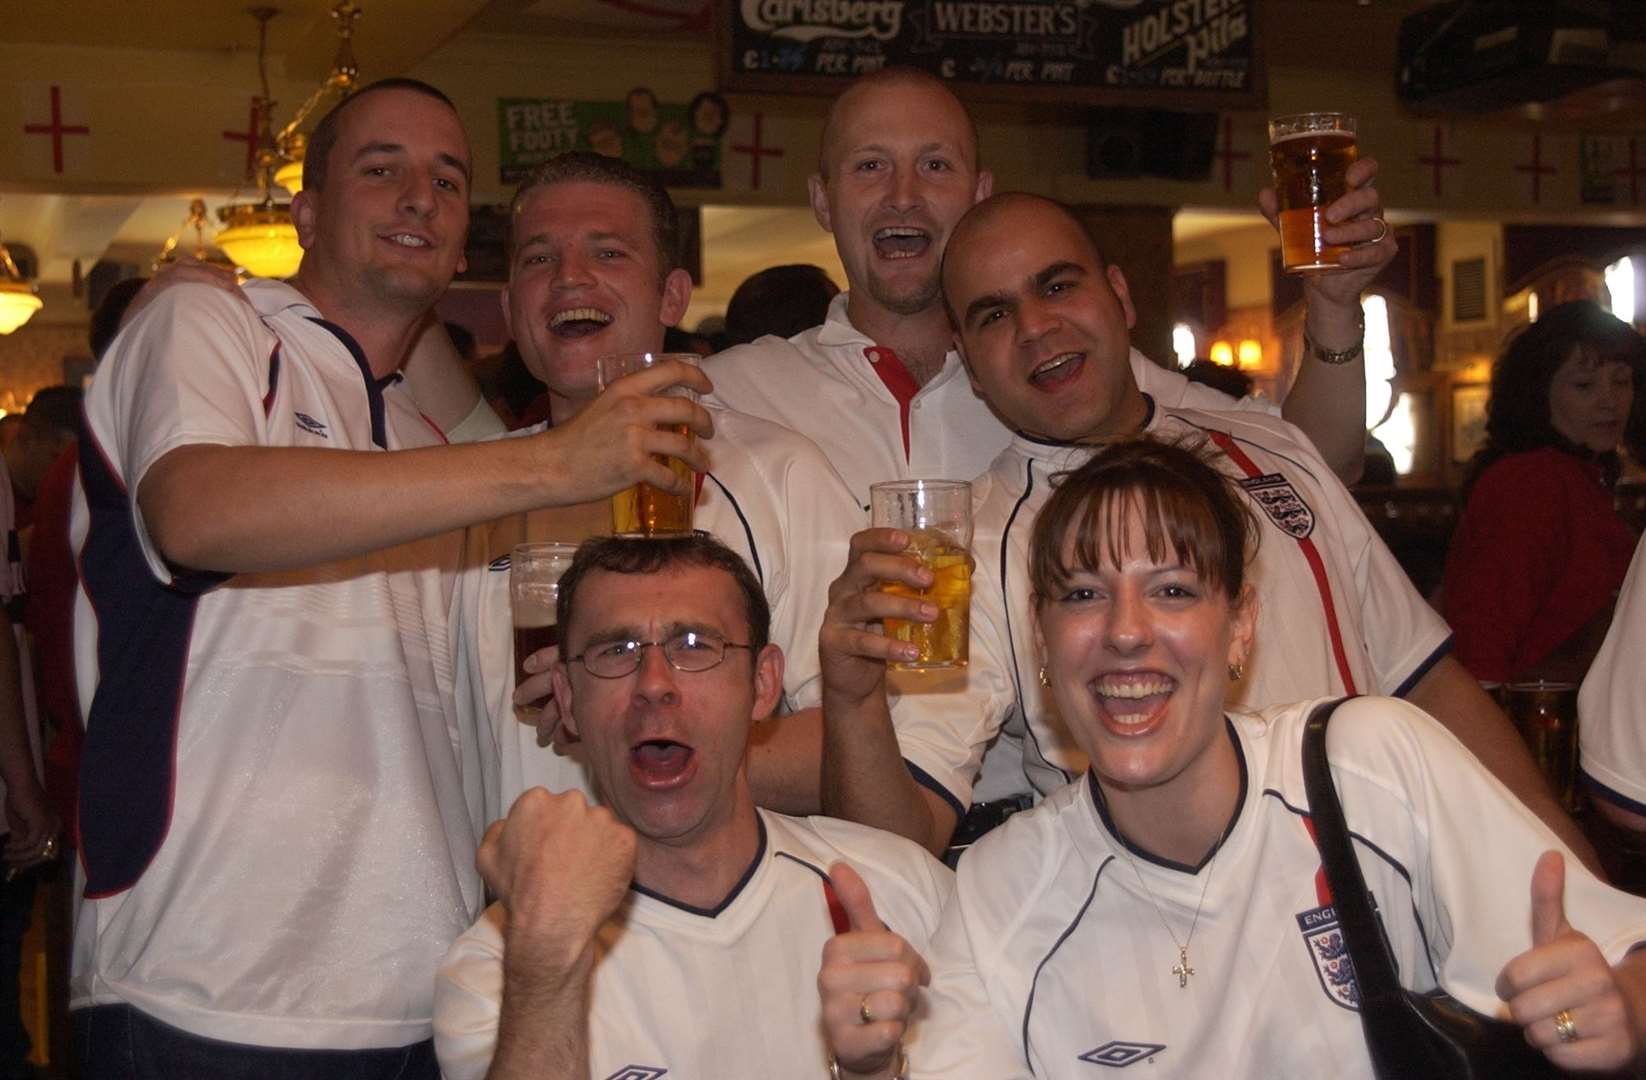 High hopes at The Old Ash Tree pub in Chatham for England v Brazil in the 2002 World Cup quarter final